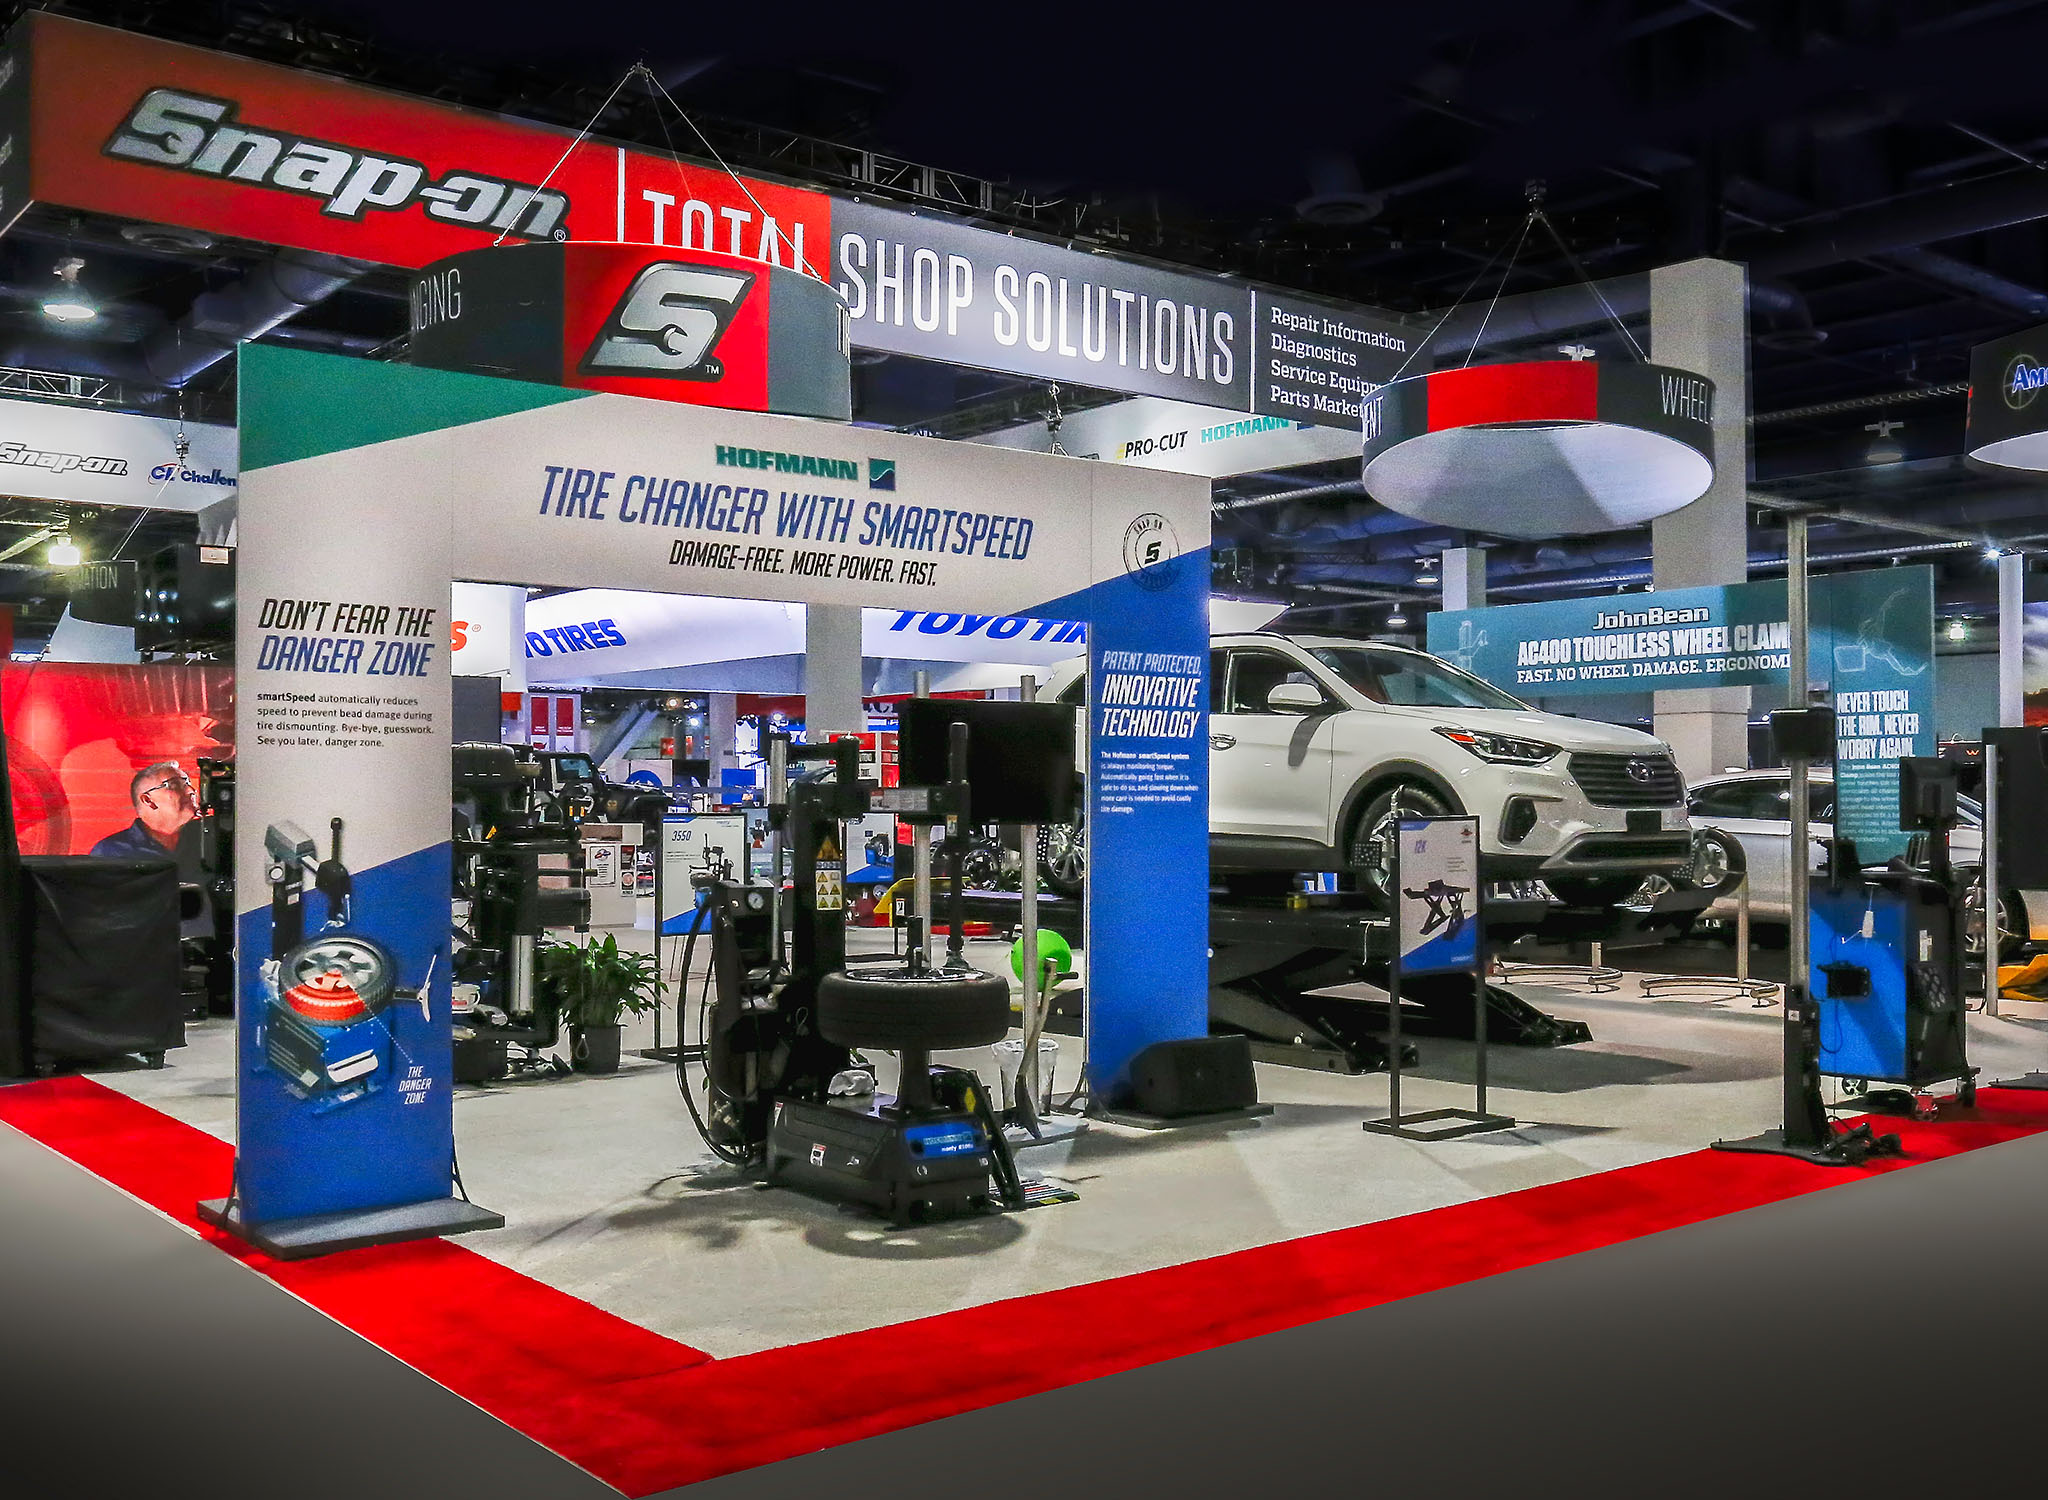 Event photograph of Snap-on trade show booth.